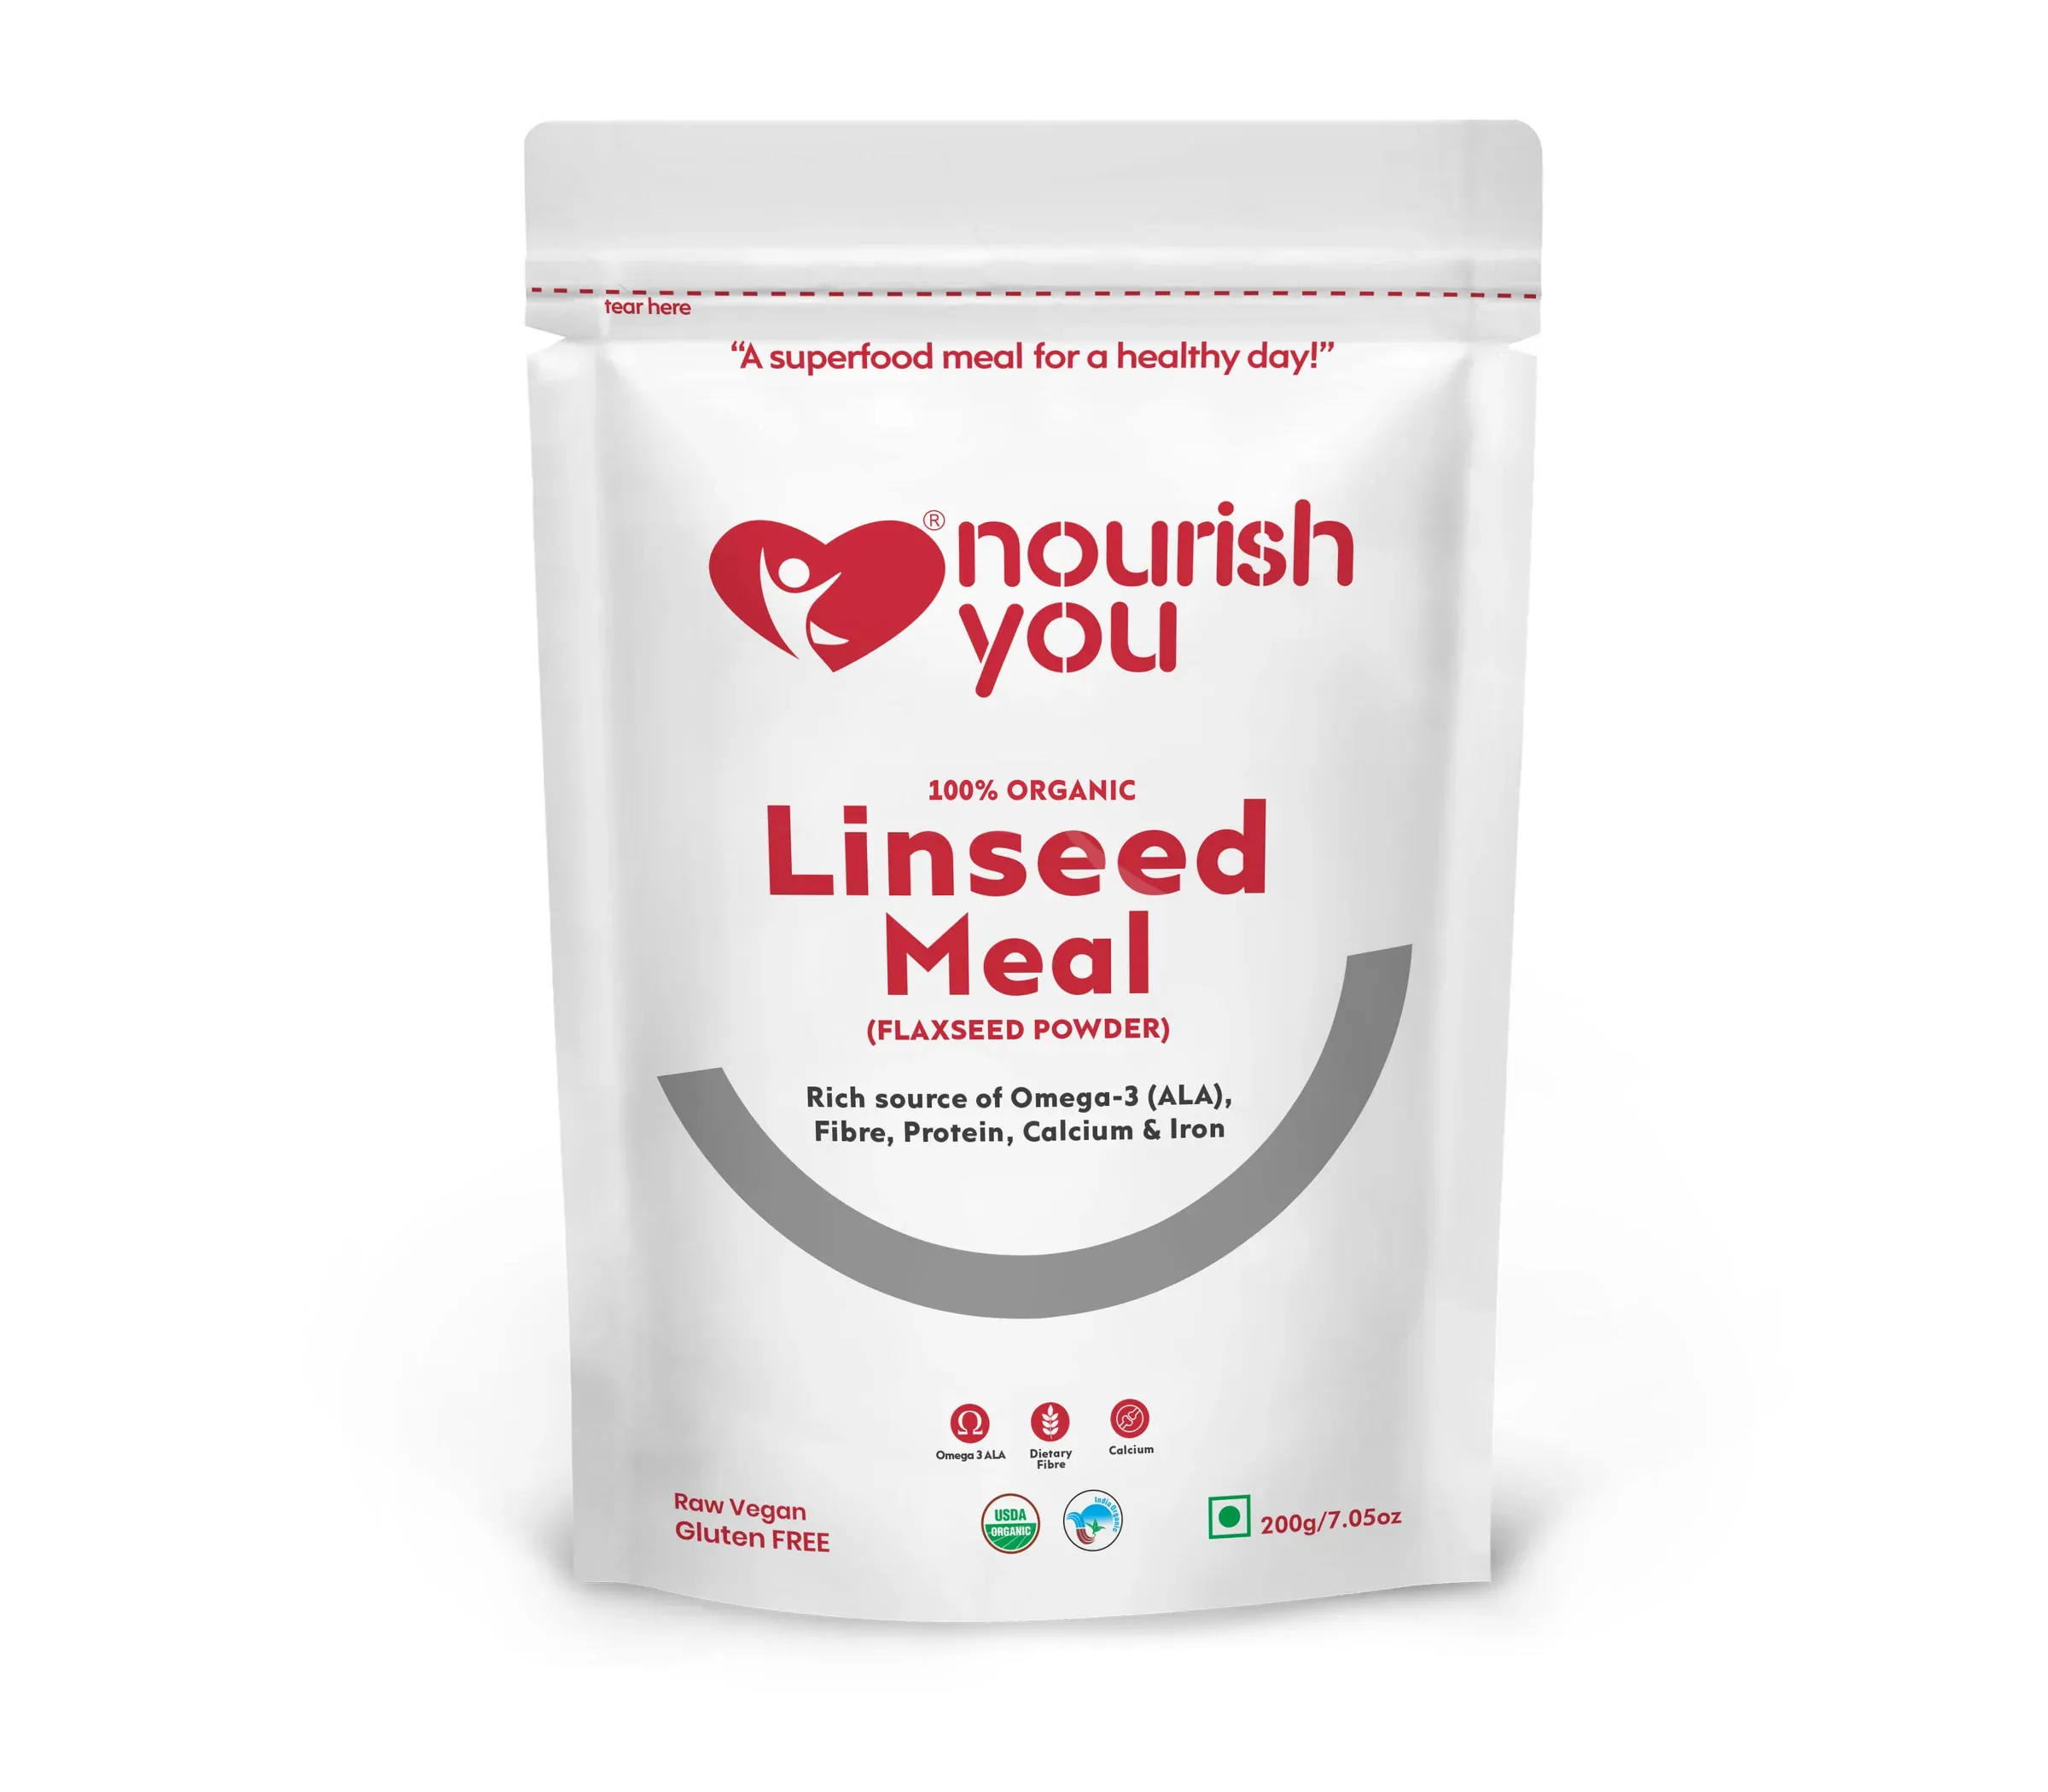 Nourish You Linseed Meal Image